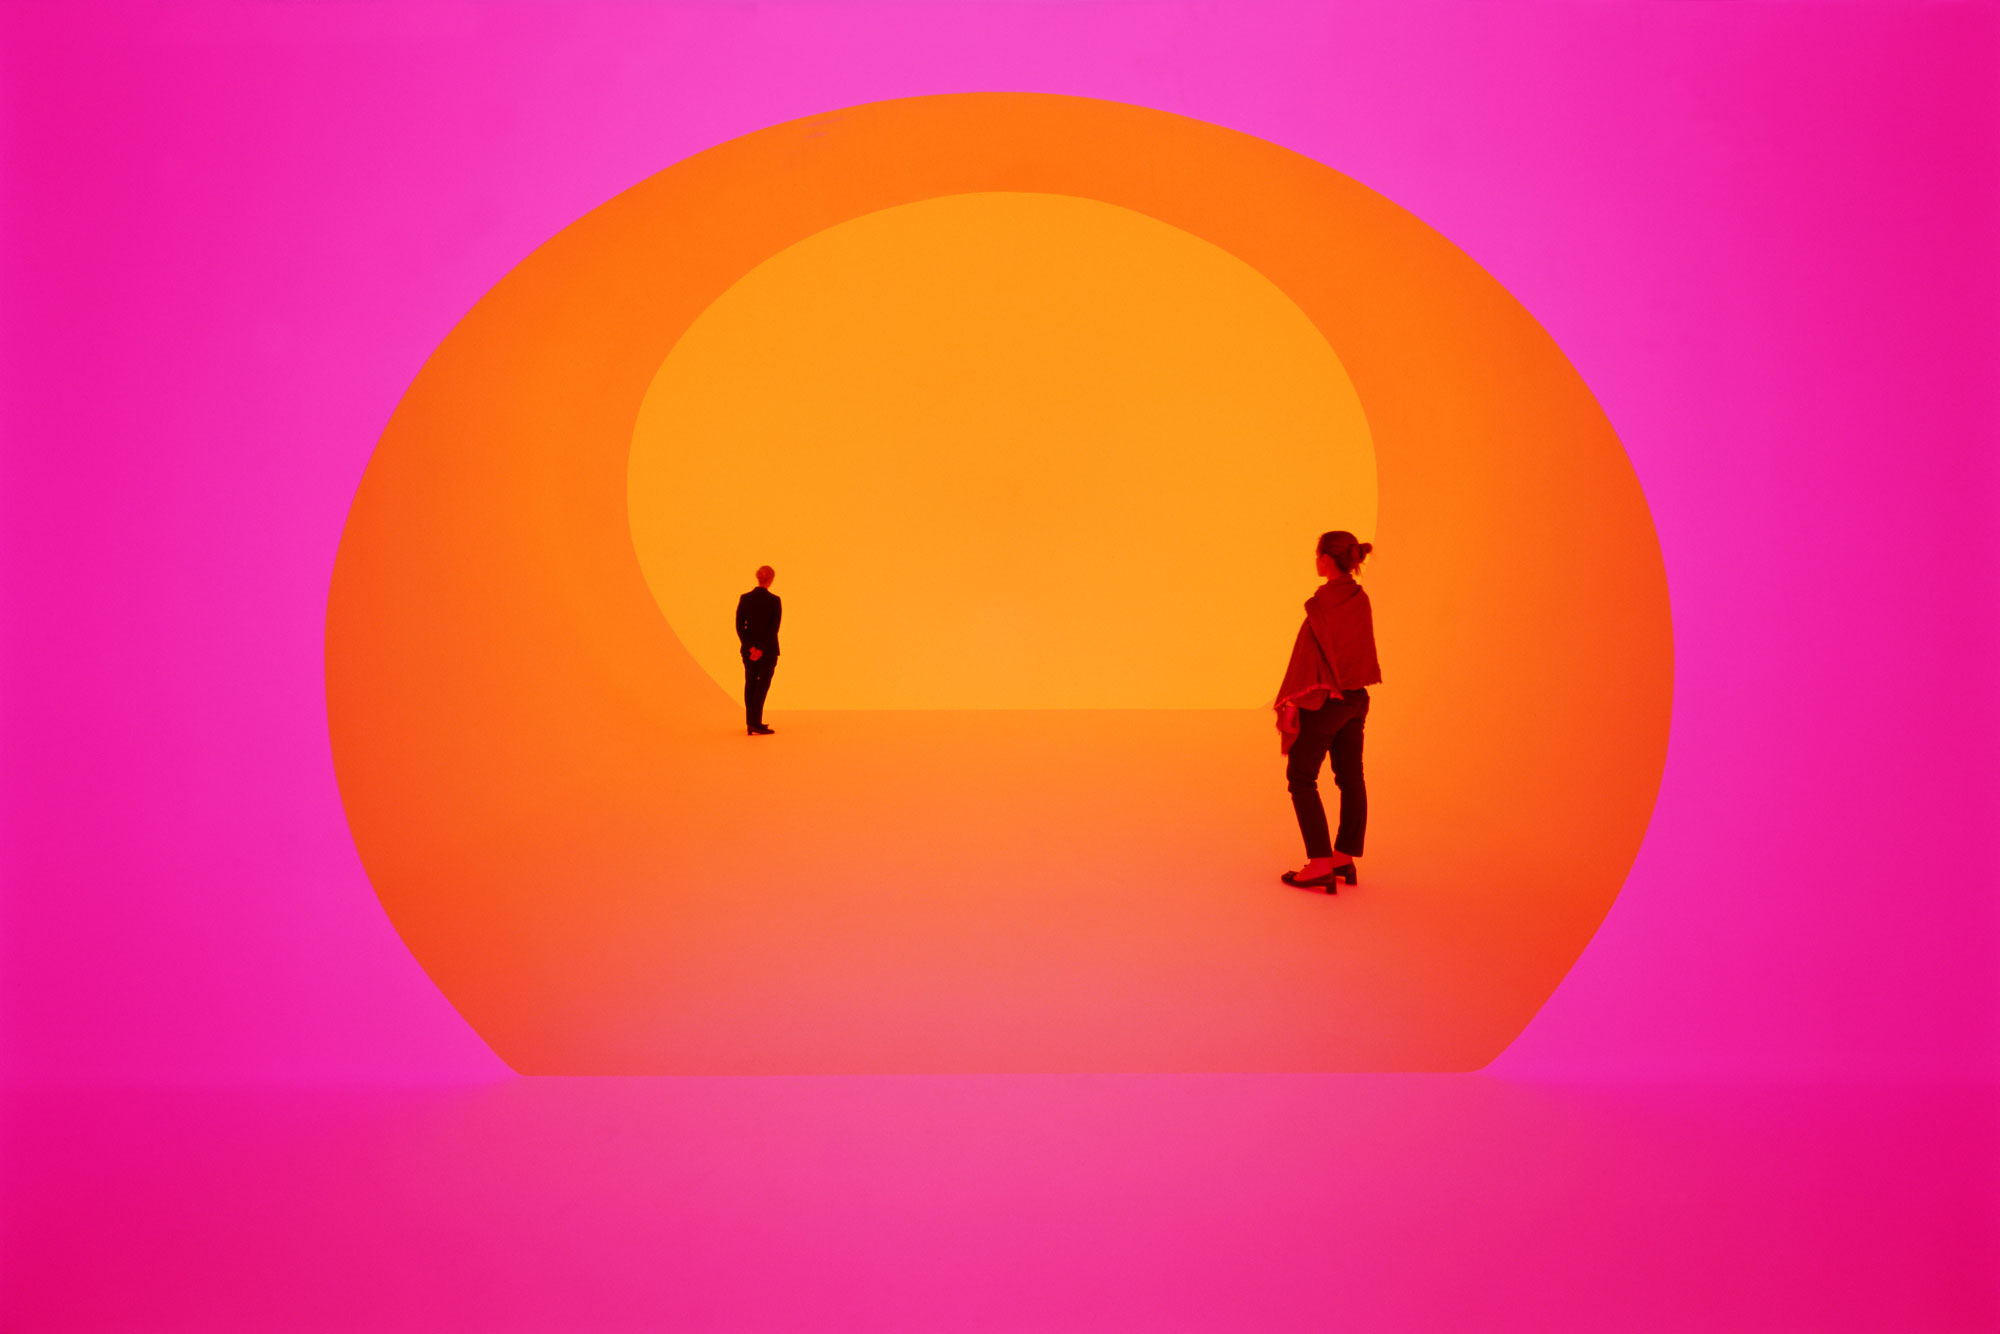 From the "James Turrell Installation at Crystals" in Las Vegas, 2013.